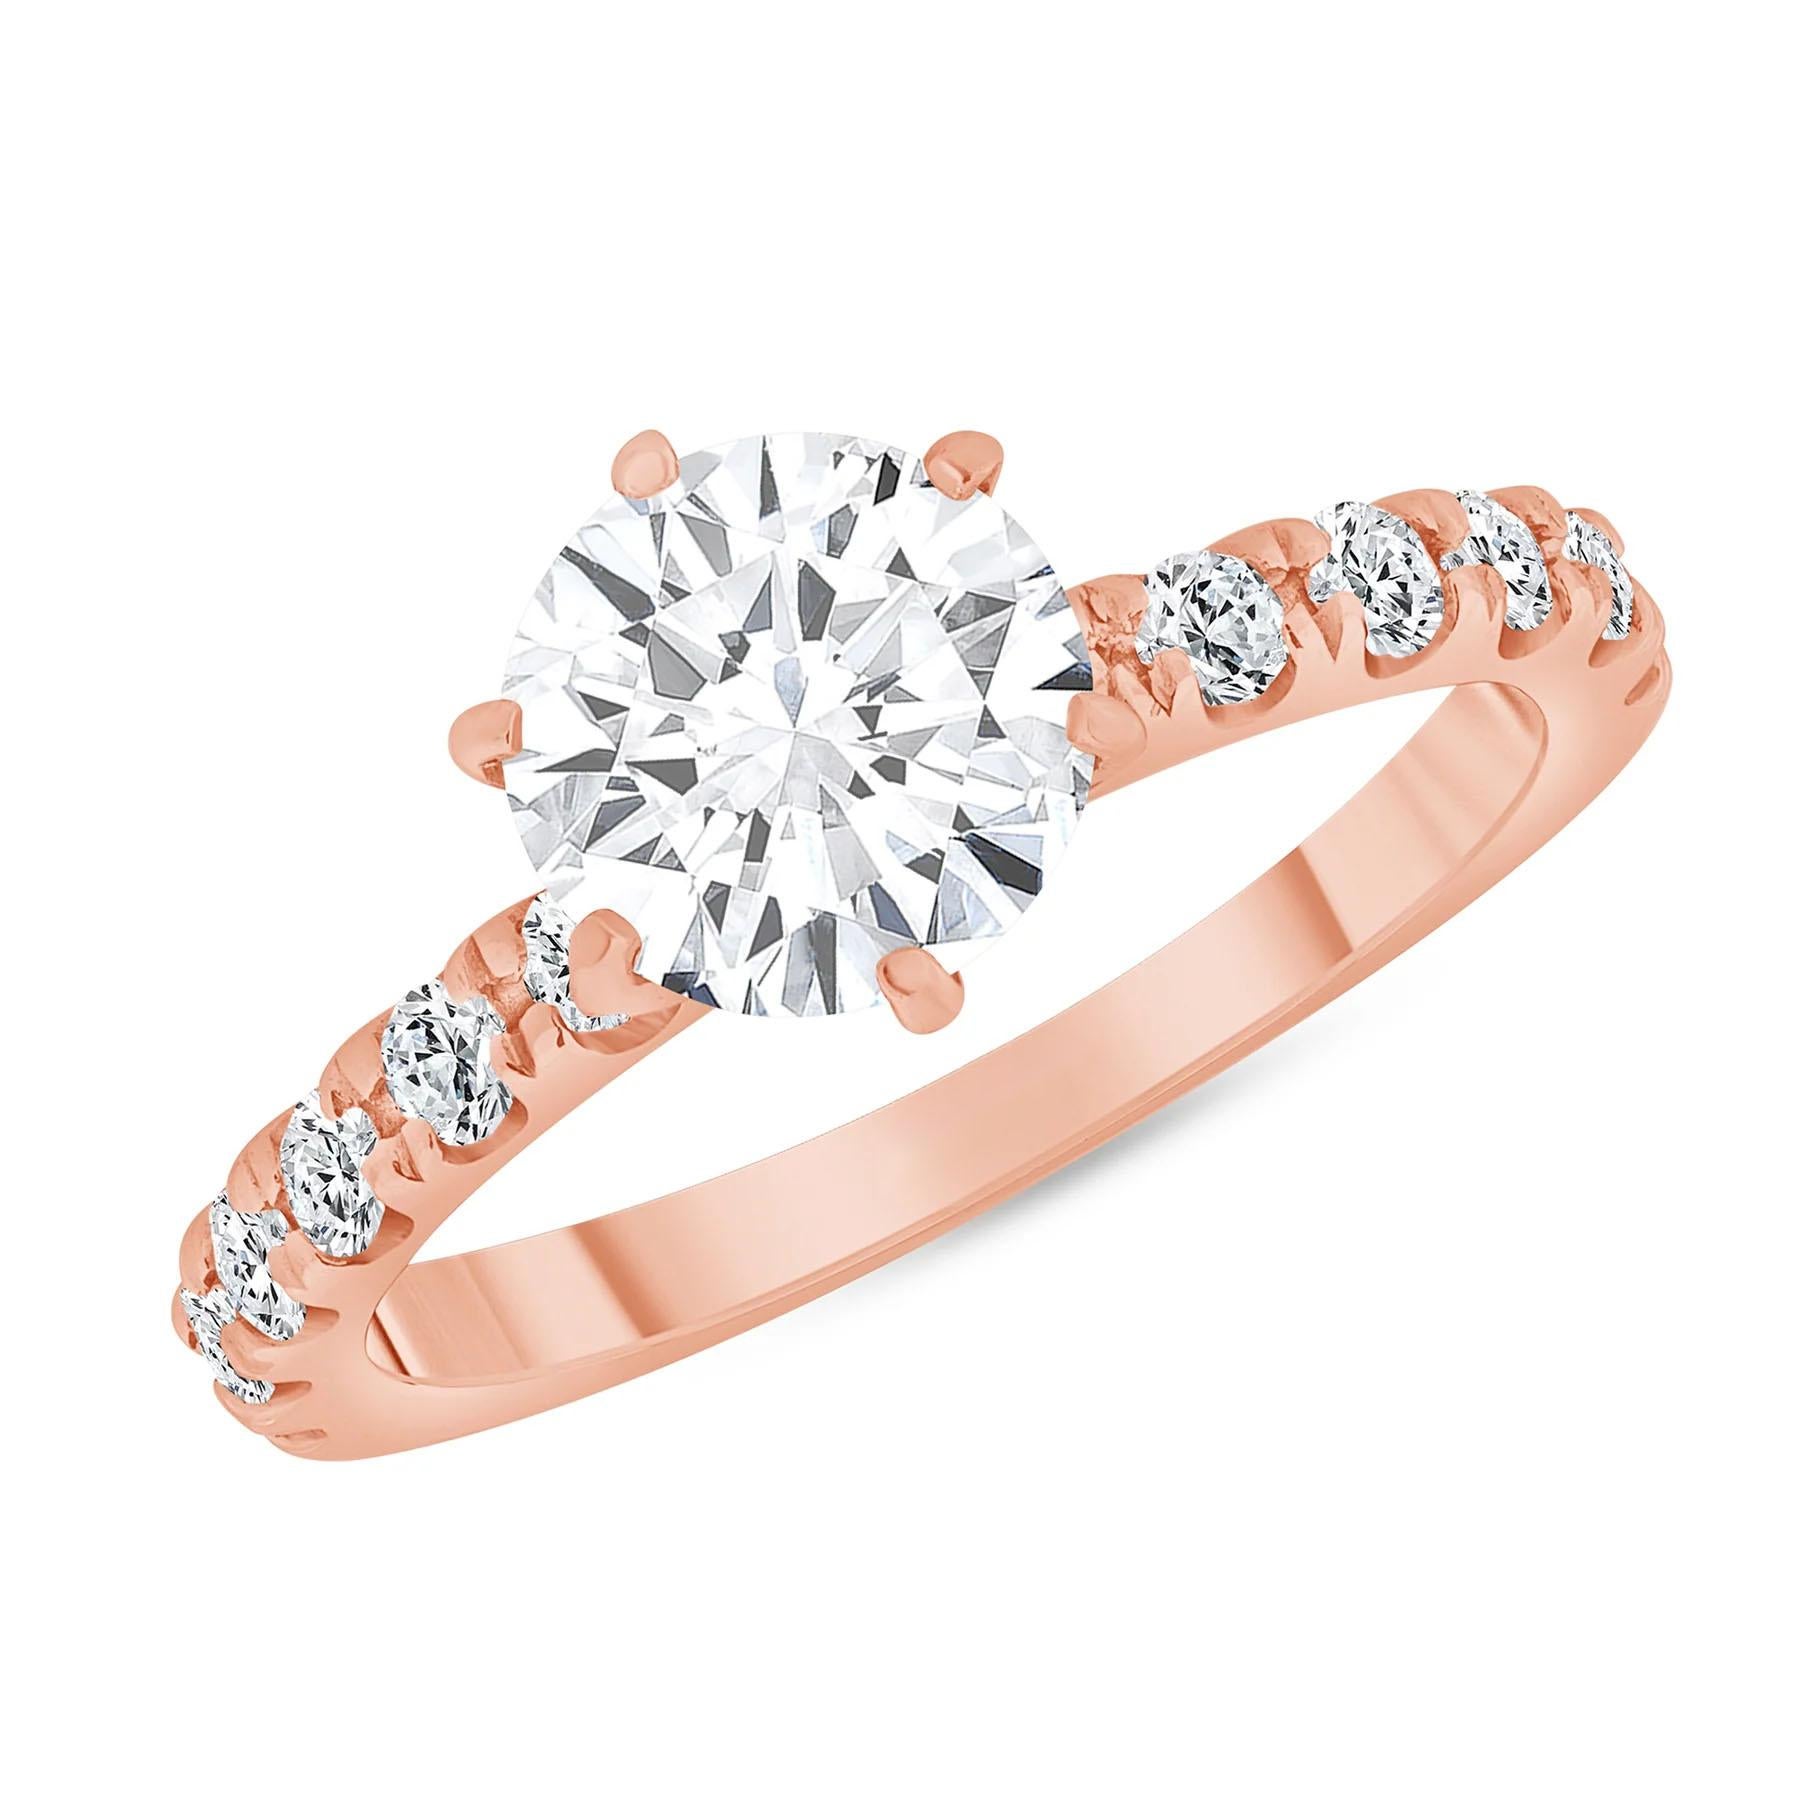 For Sale:  Rylie's Solitaire Engagement Ring 6-prong Half-eternity 3